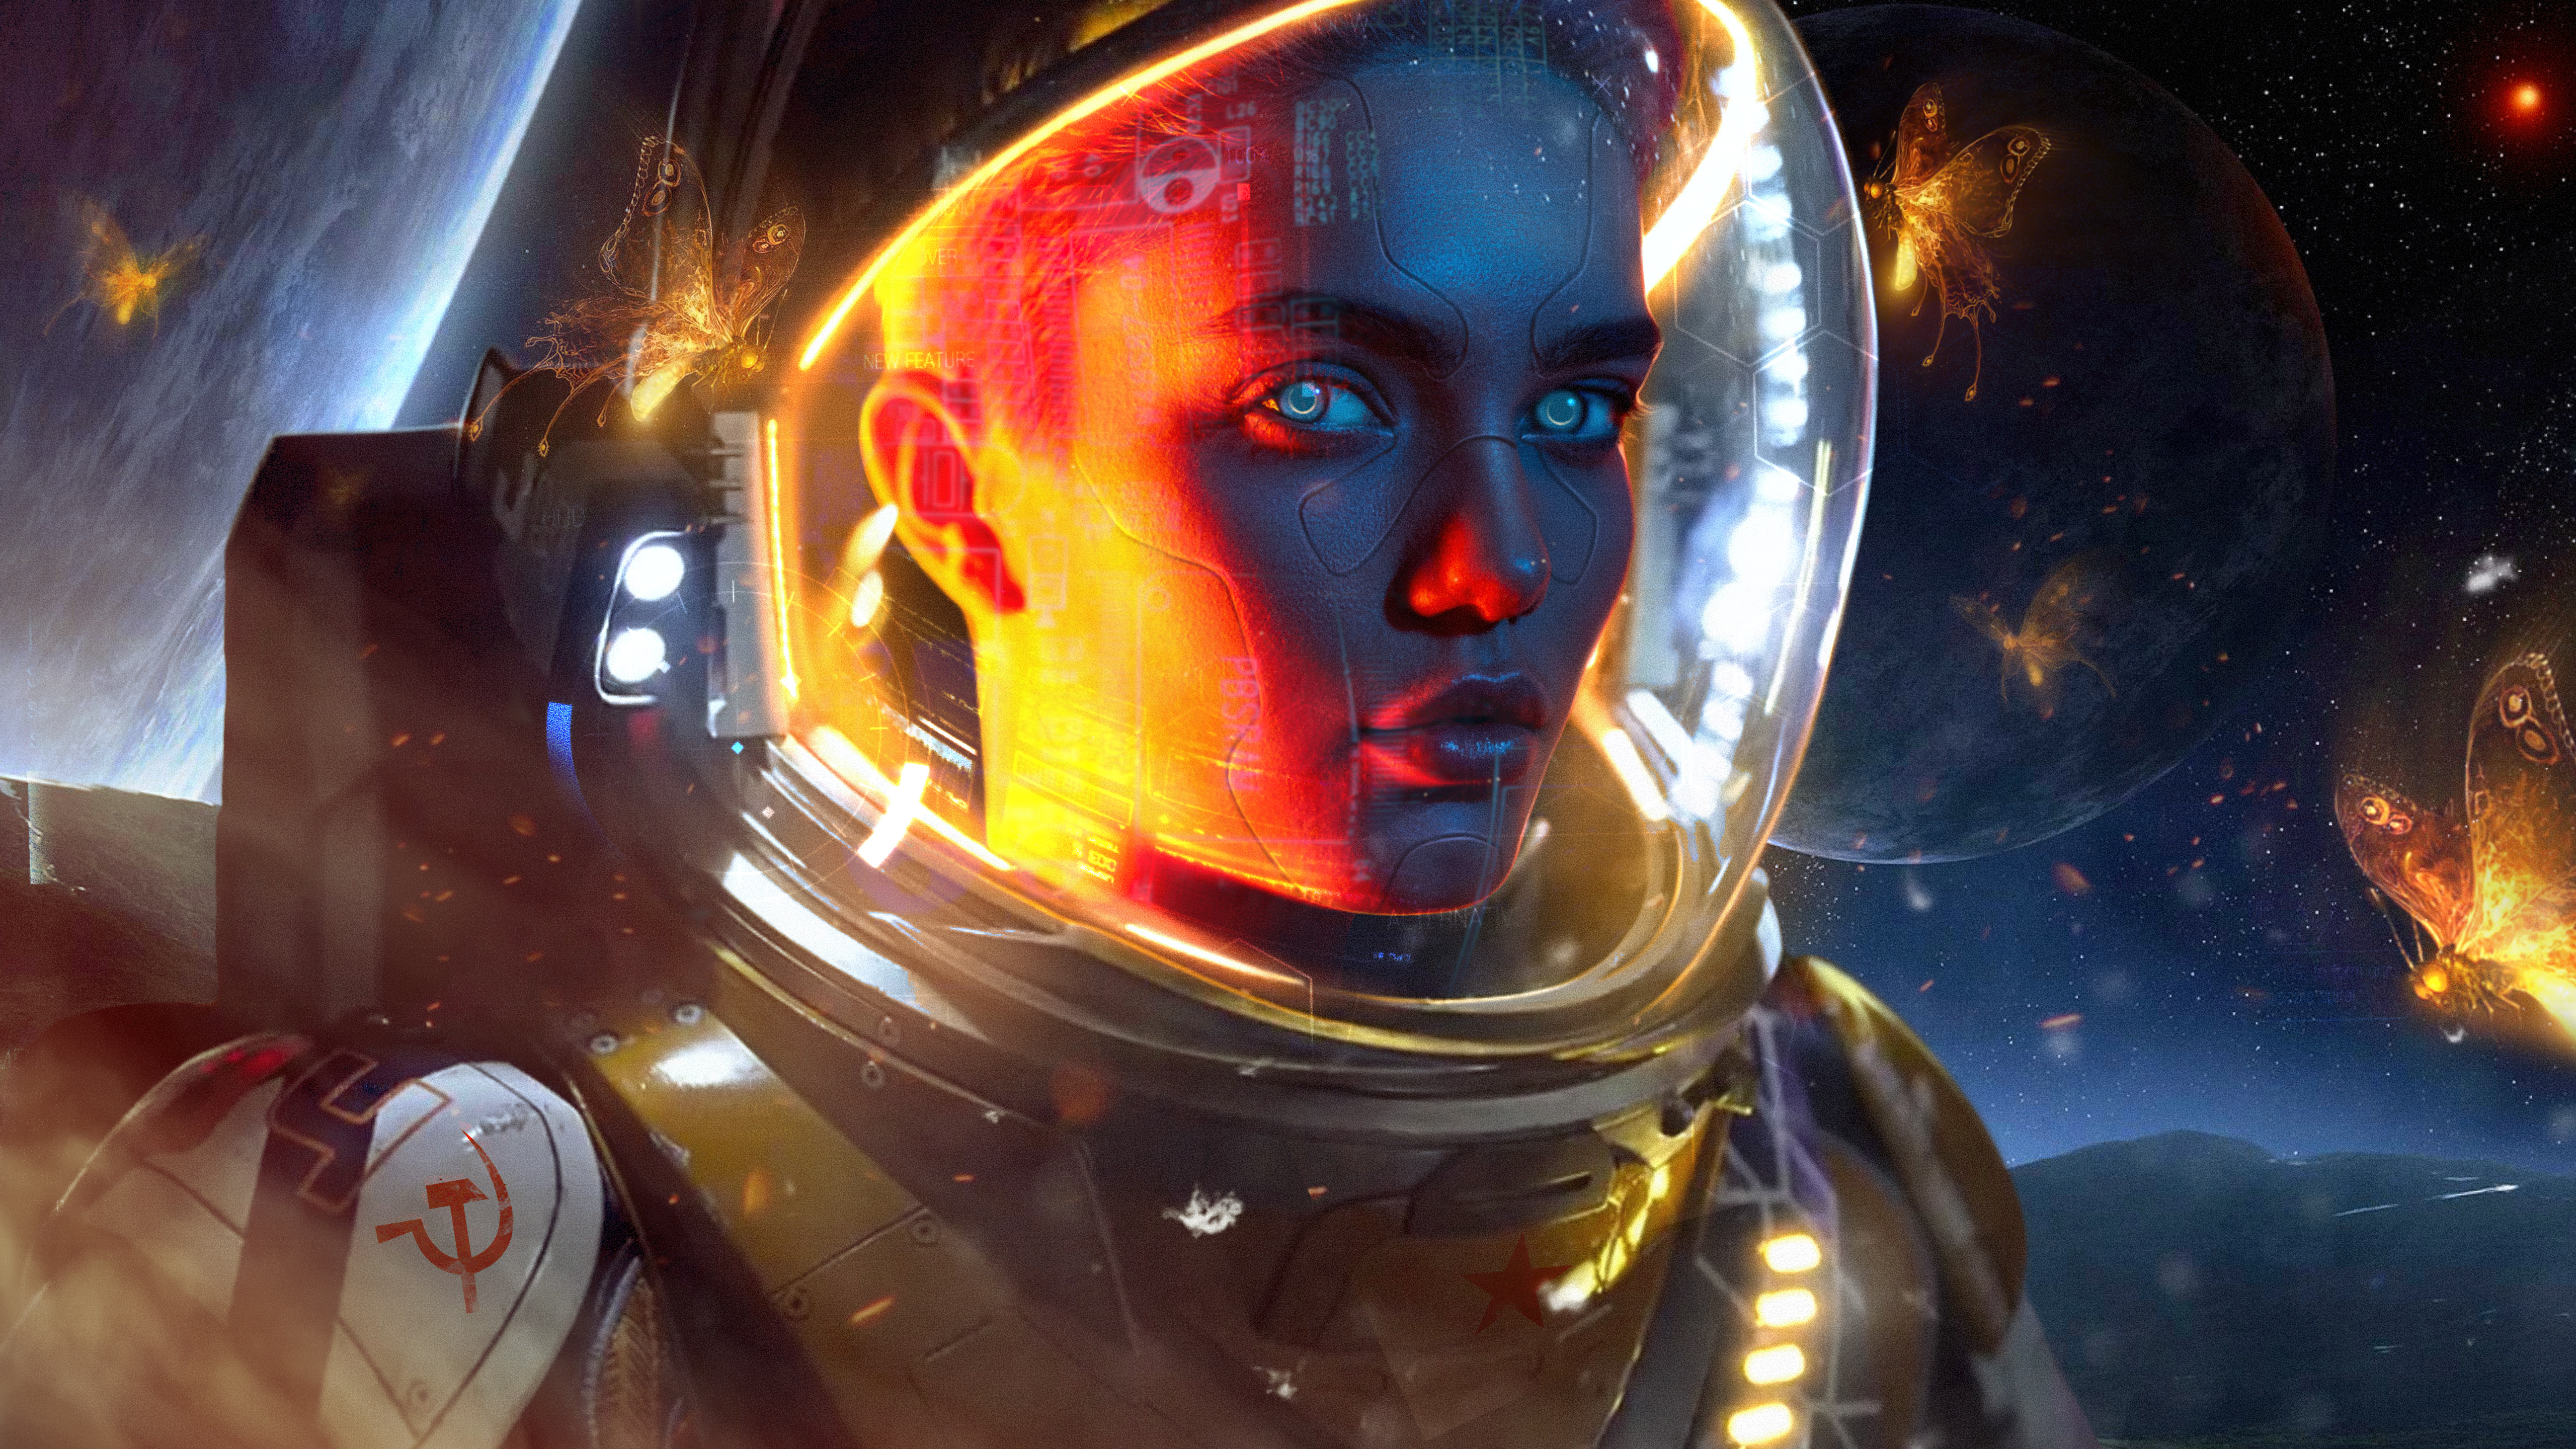 General 5120x2880 digital art artwork illustration CGI women cyborg spacesuit astronaut space art communism portrait butterfly insect animals space looking at viewer stars